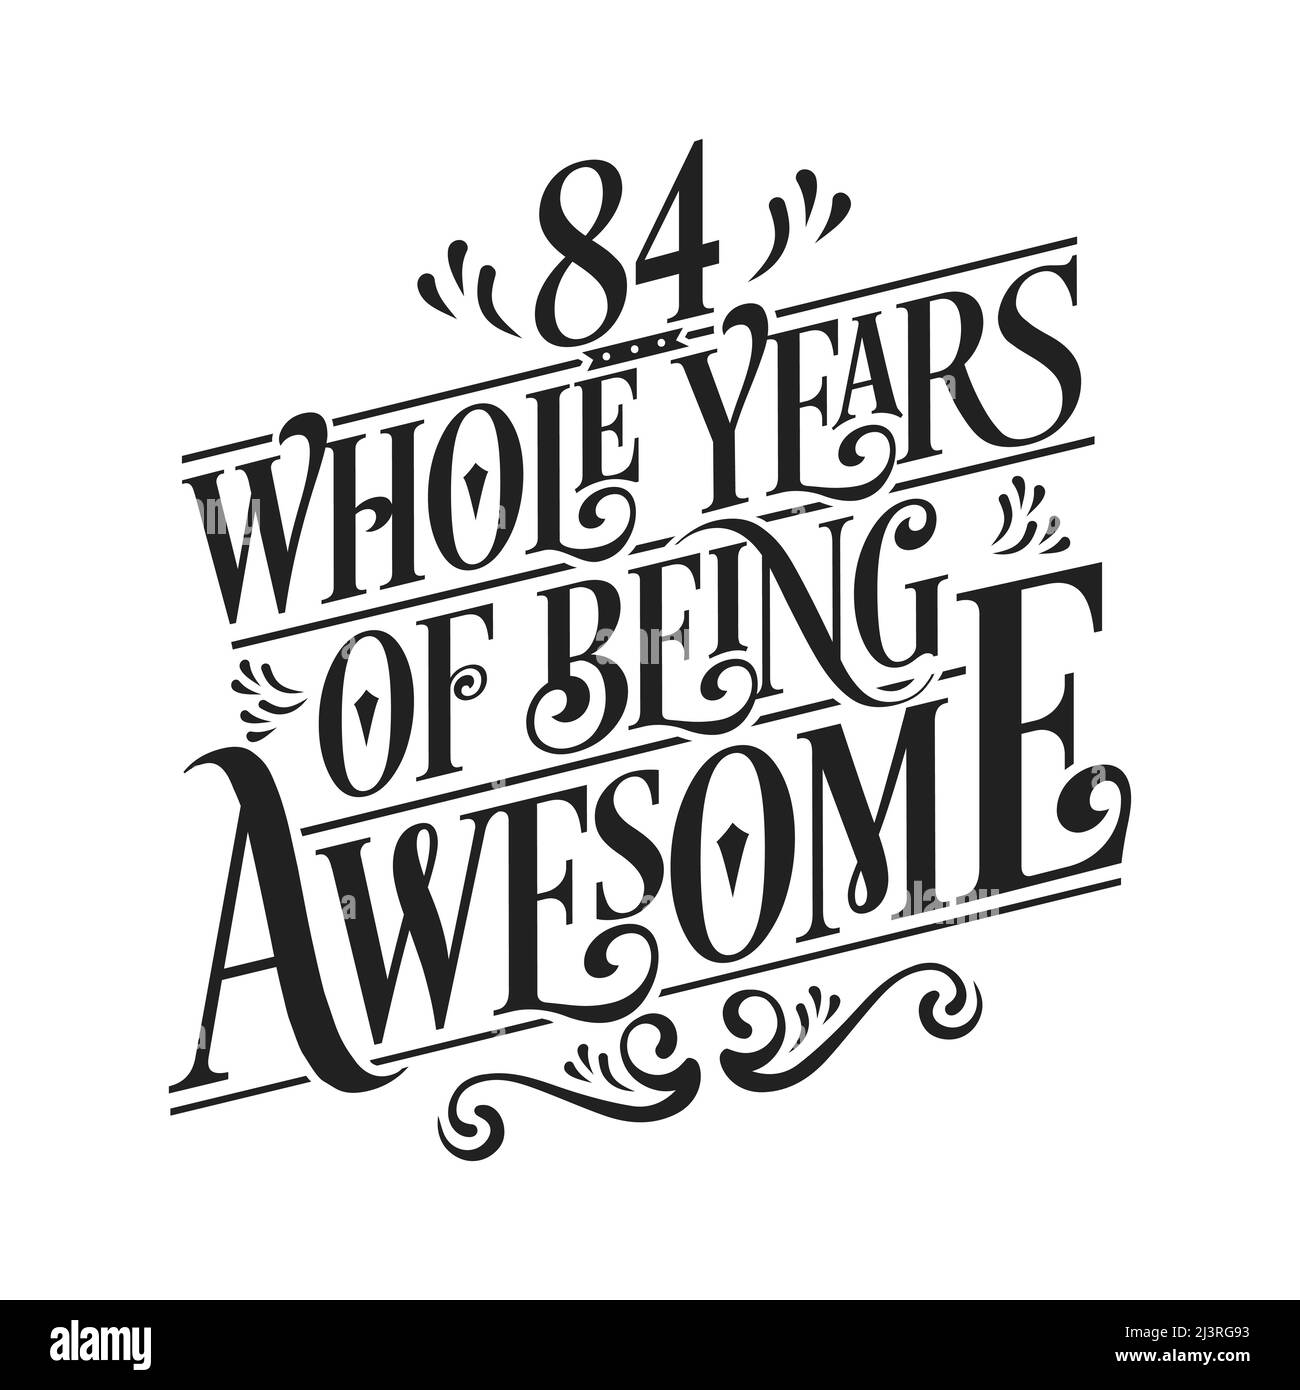 84 whole years of being awesome. 84th birthday celebration lettering Stock Vector